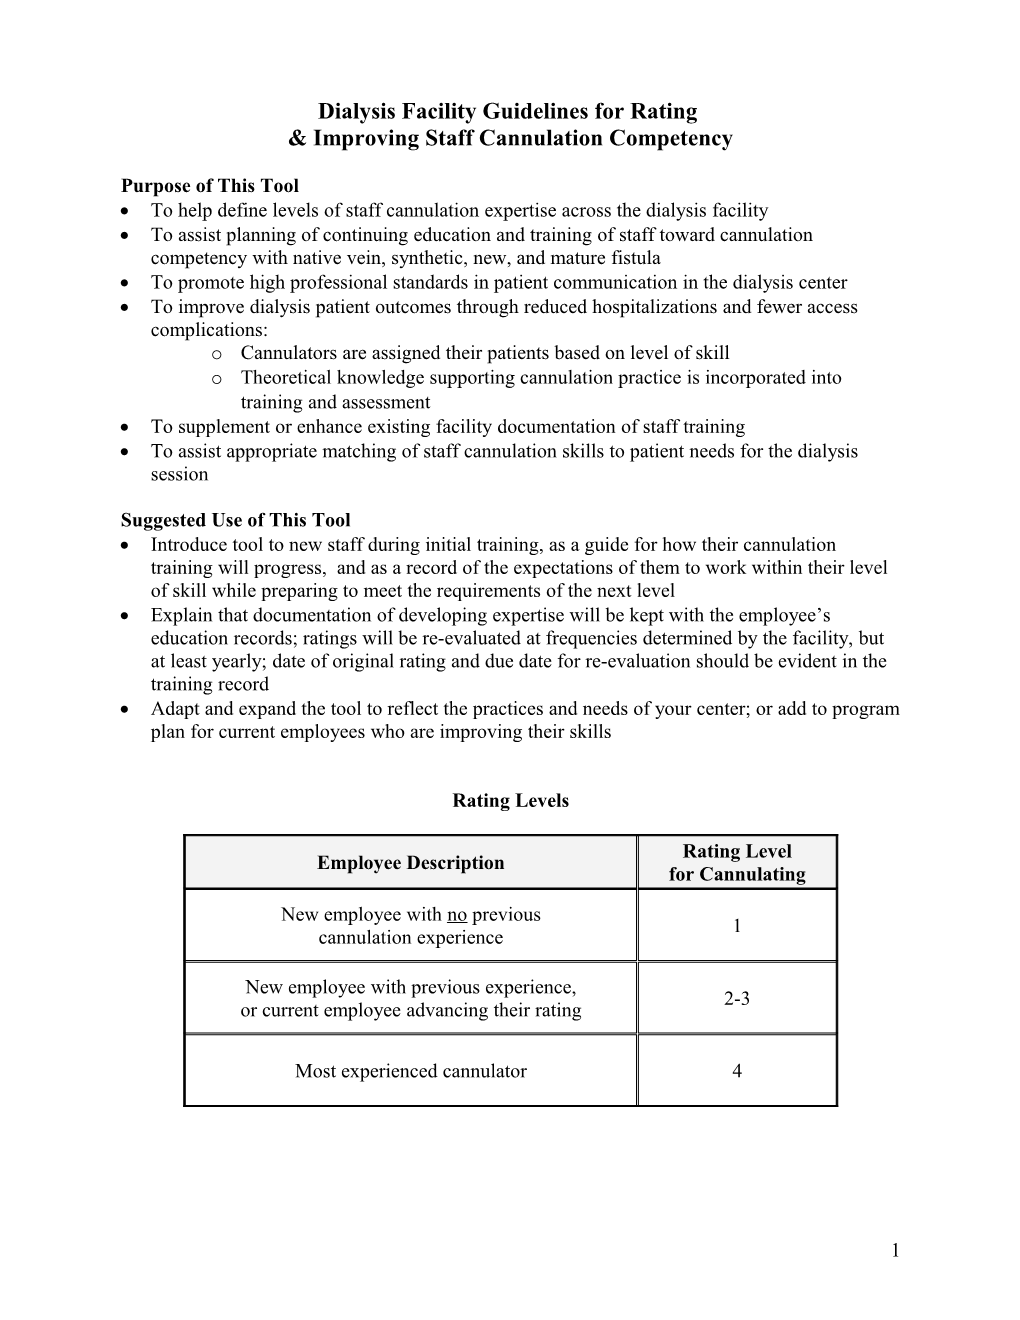 Supplementary Components to the Staff Rating System for Venipuncture Policy and Procedure